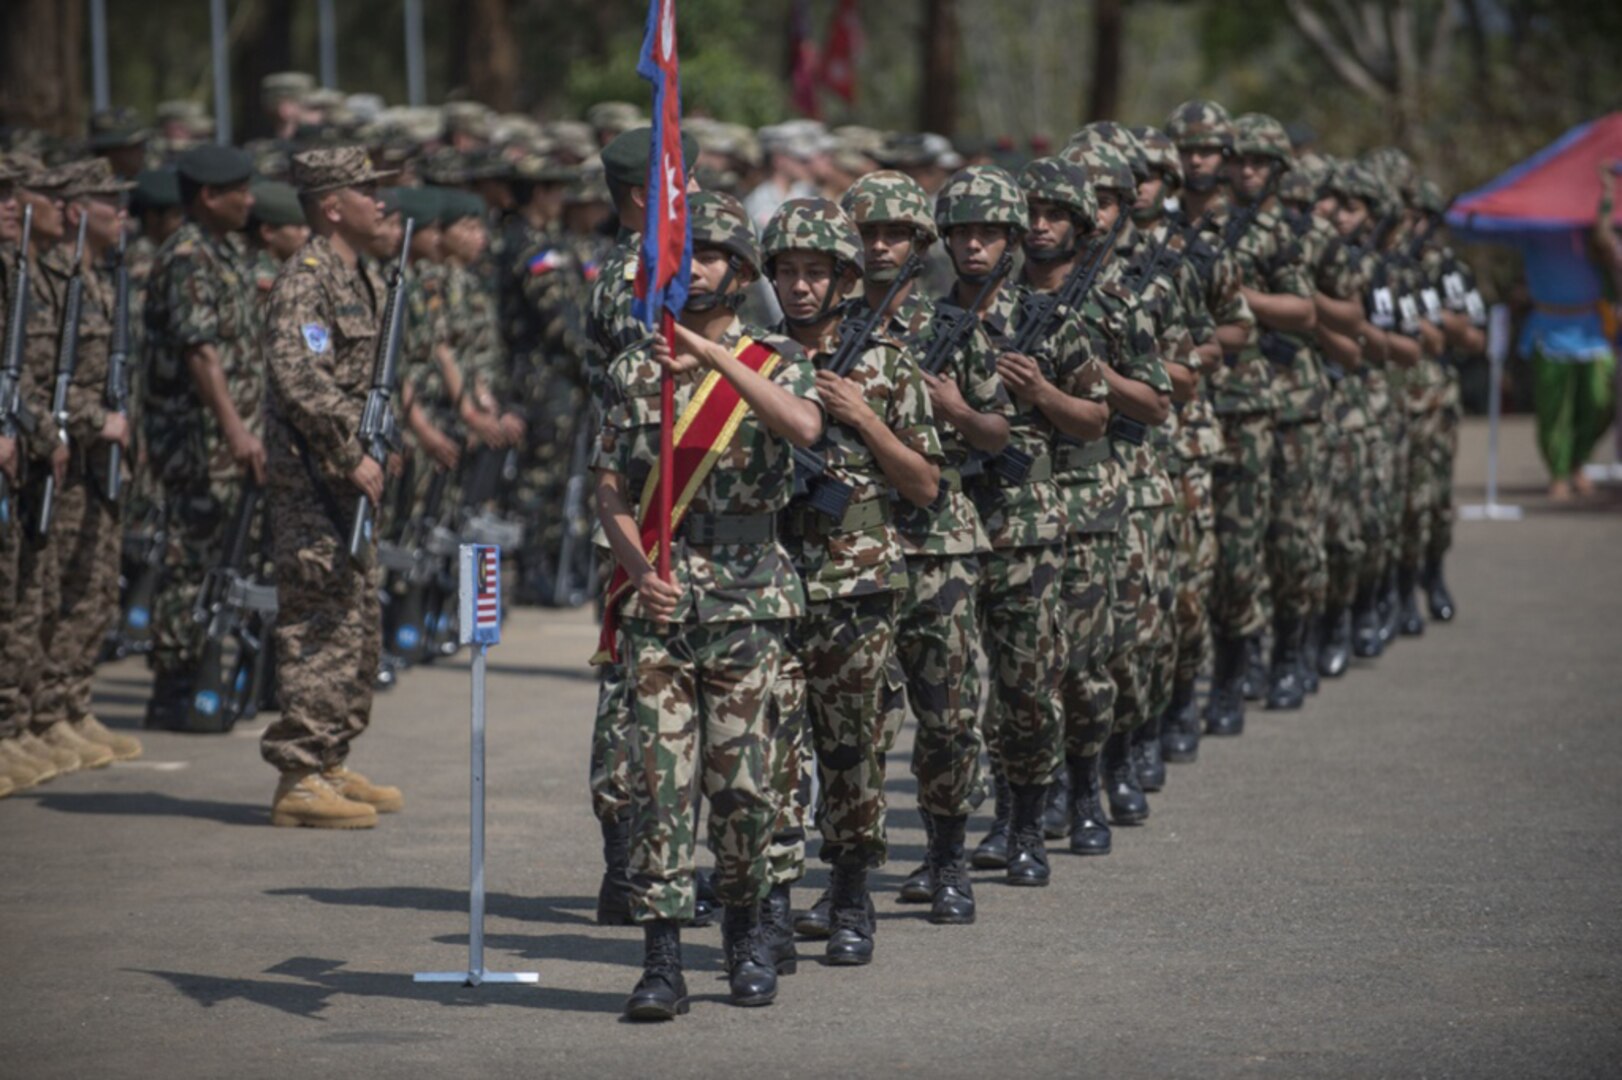 Nepalese soldiers parade their colors in the closing ceremony during exercise Shanti Prayas III in Nepal, April 3, 2017. Shanti Prayas is a multinational United Nations peacekeeping exercise designed to provide pre-deployment training to U.N. partner countries in preparation for real-world peacekeeping operations. 